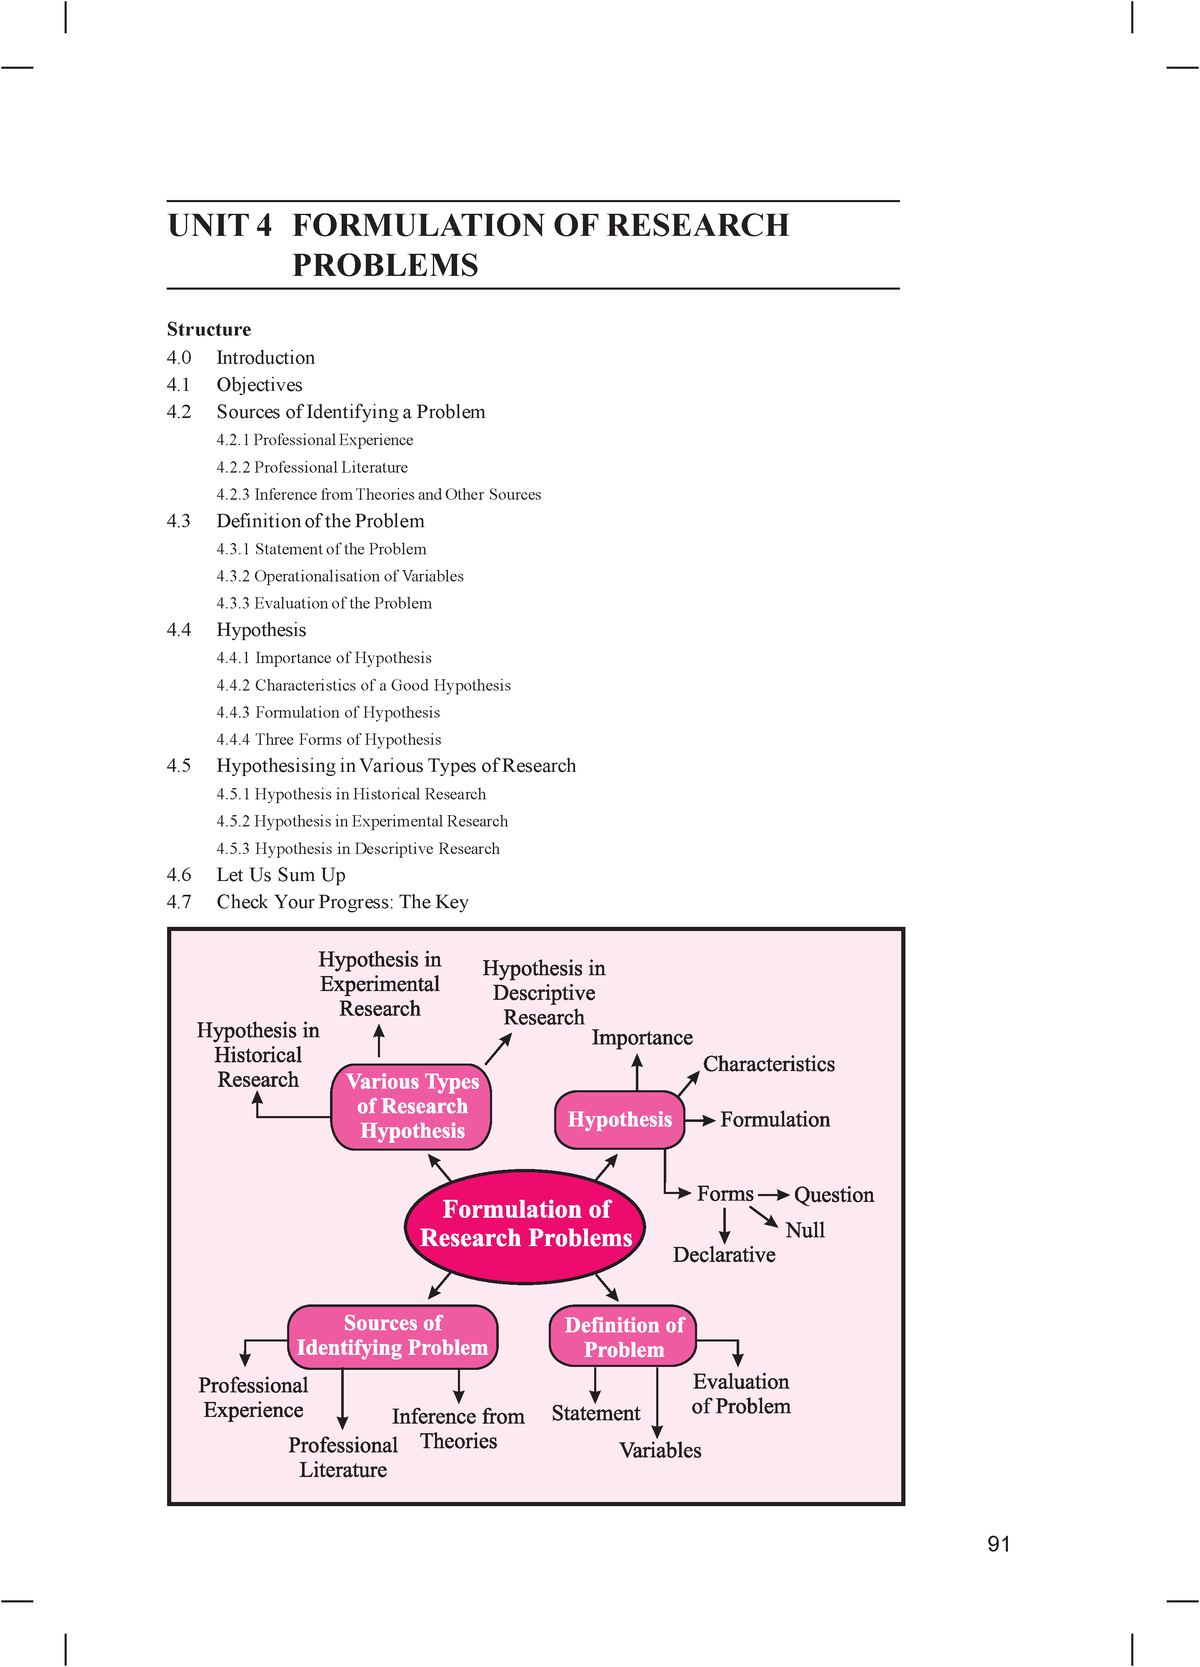 formulation of research objectives pdf